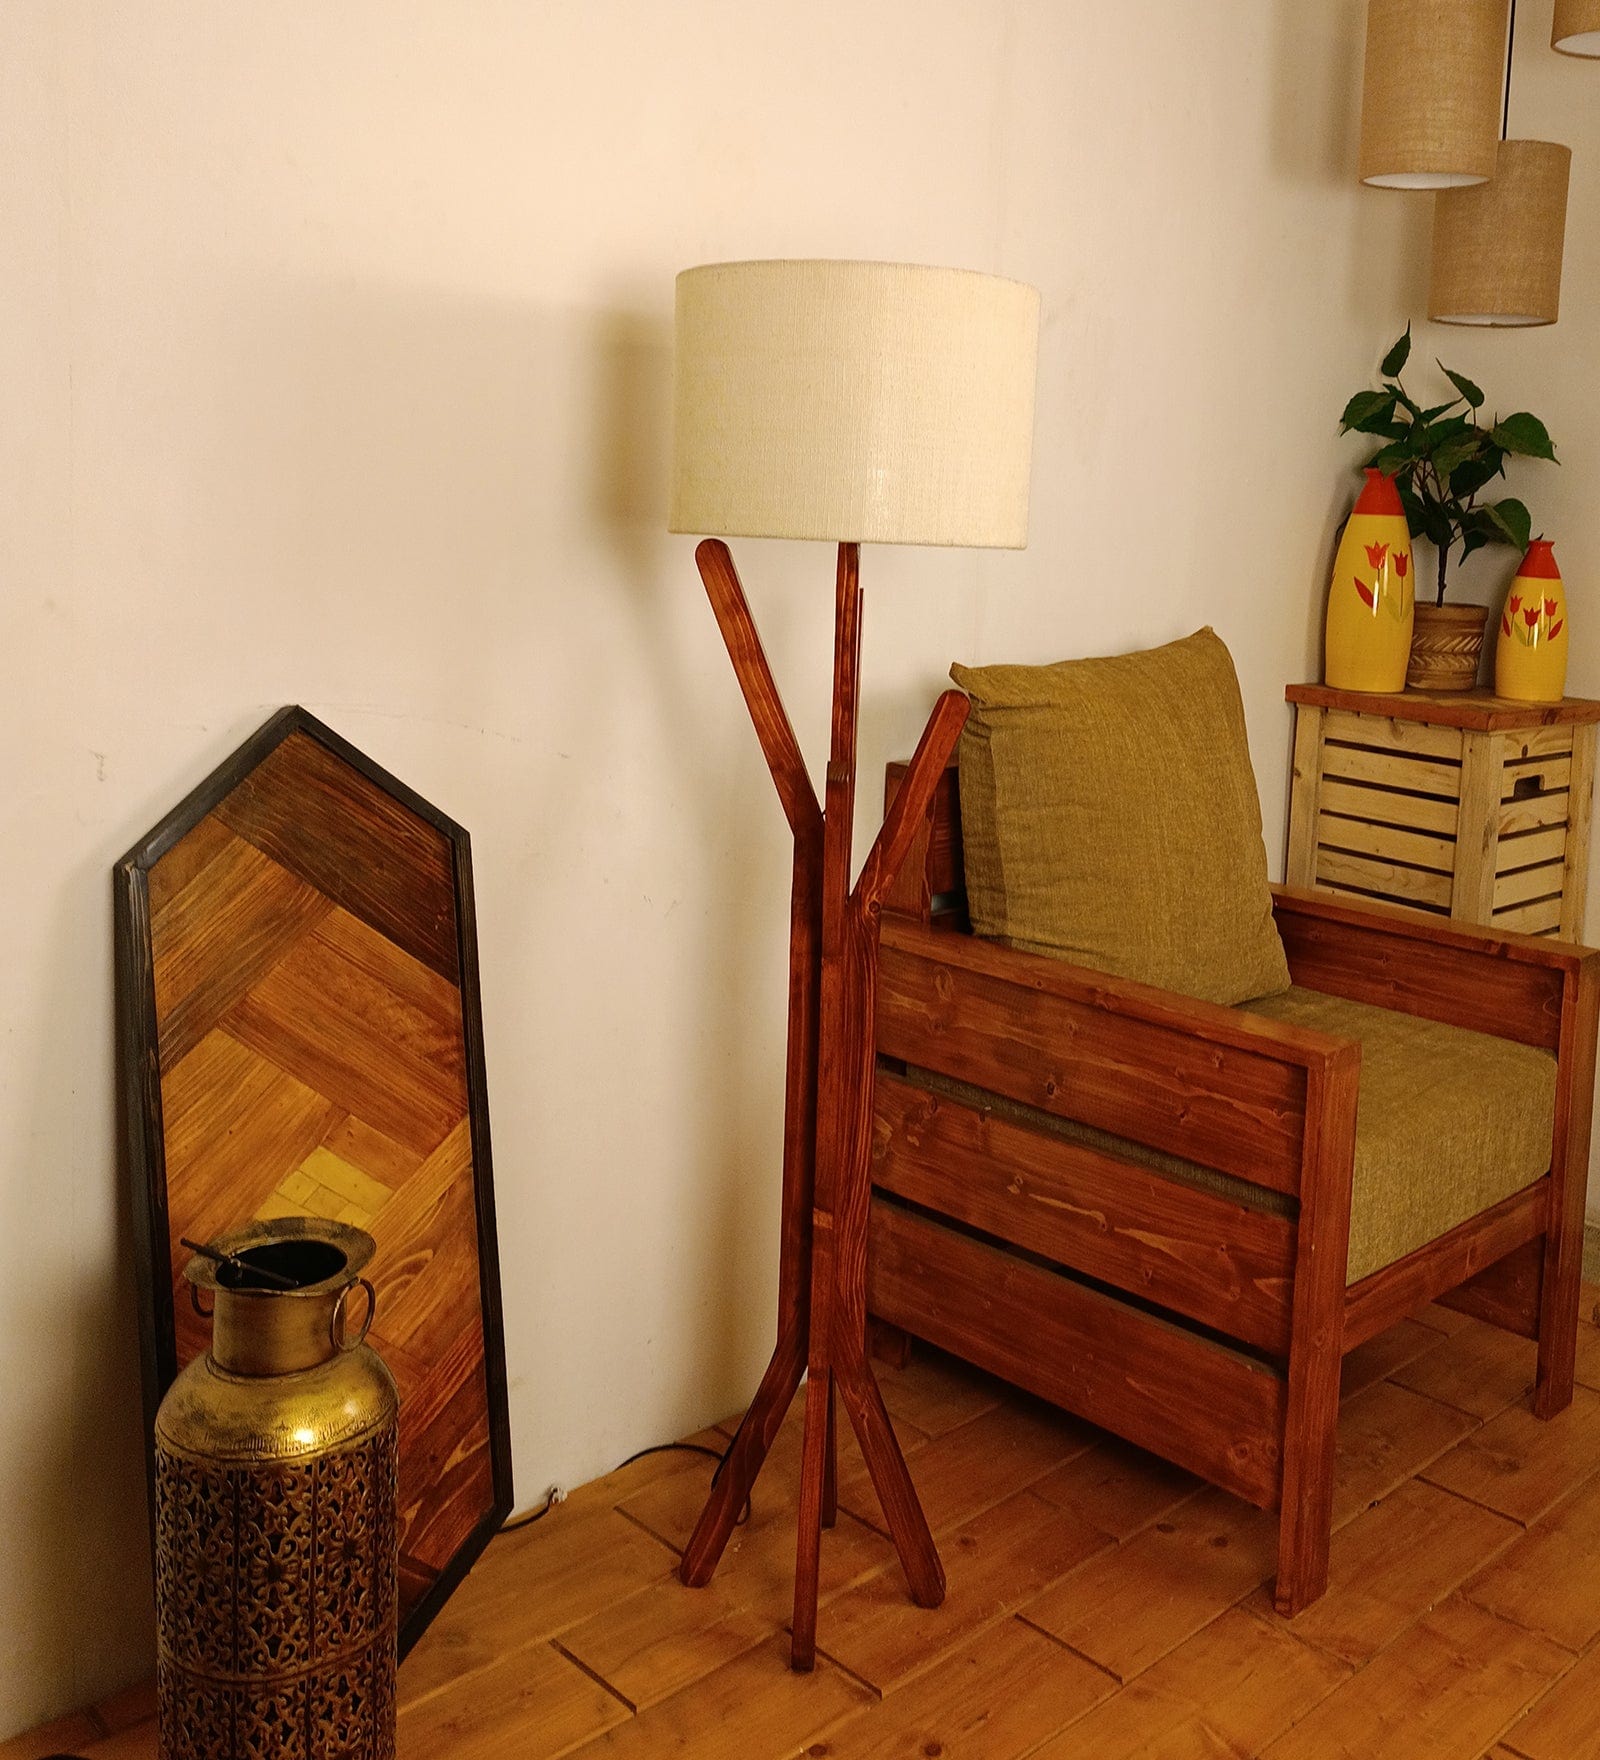 Vrikshya Wooden Floor Lamp with Brown Base and Premium Beige Fabric Lampshade (BULB NOT INCLUDED)